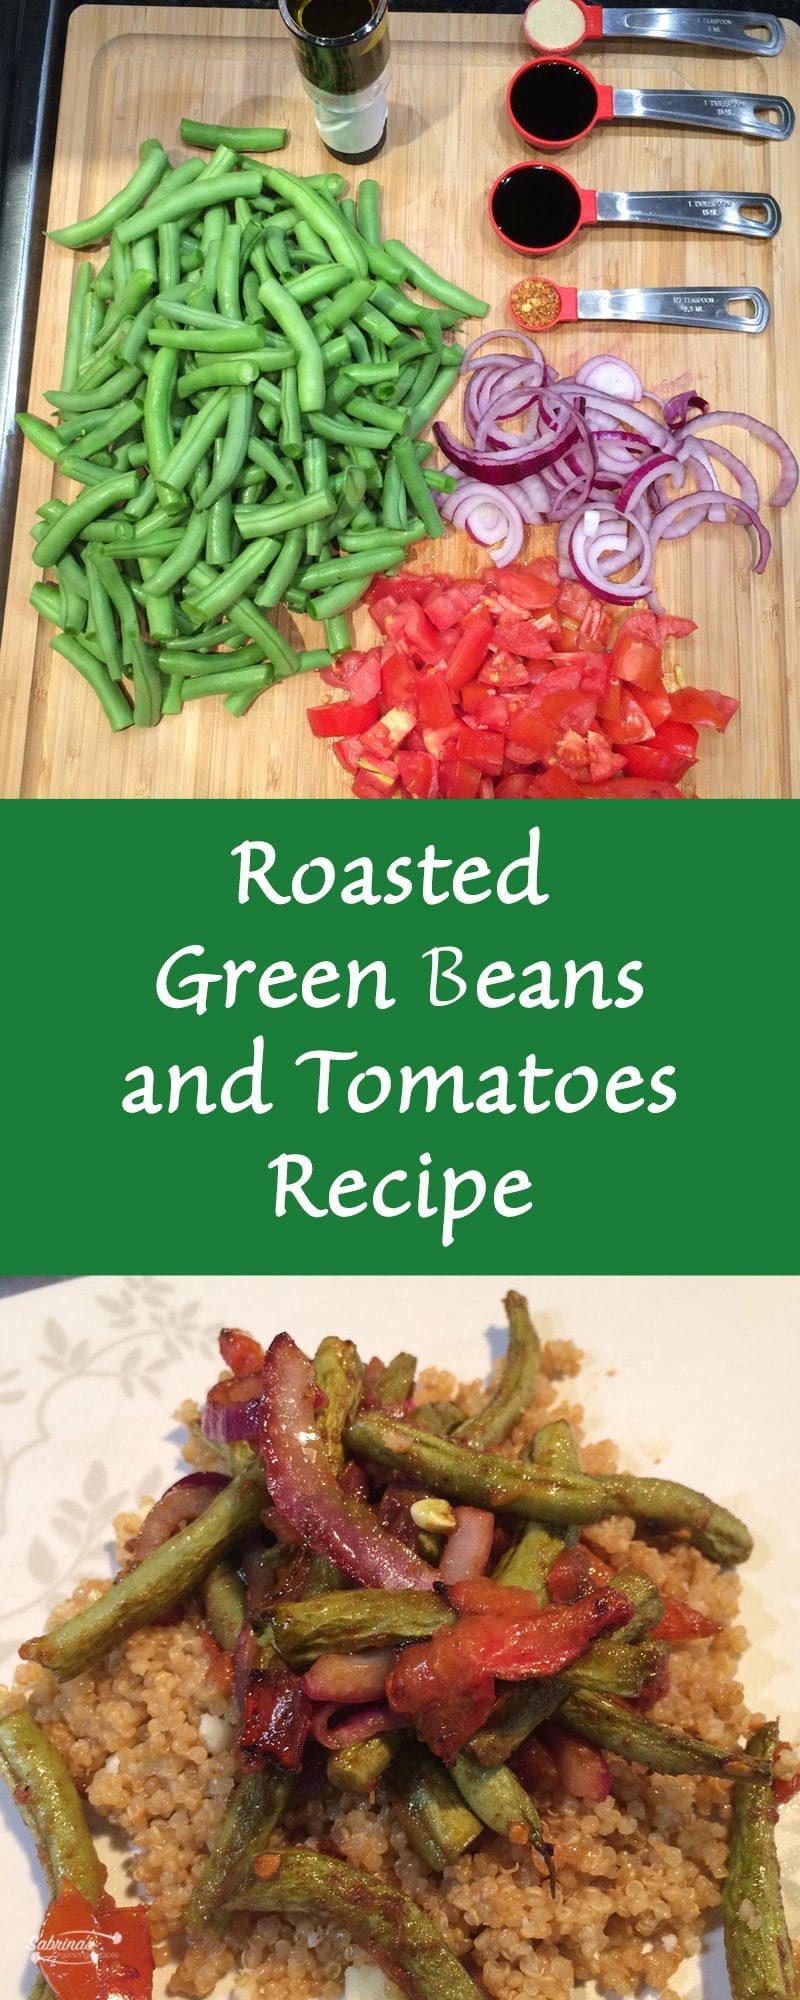 Roasted Green Beans and Tomatoes Recipe